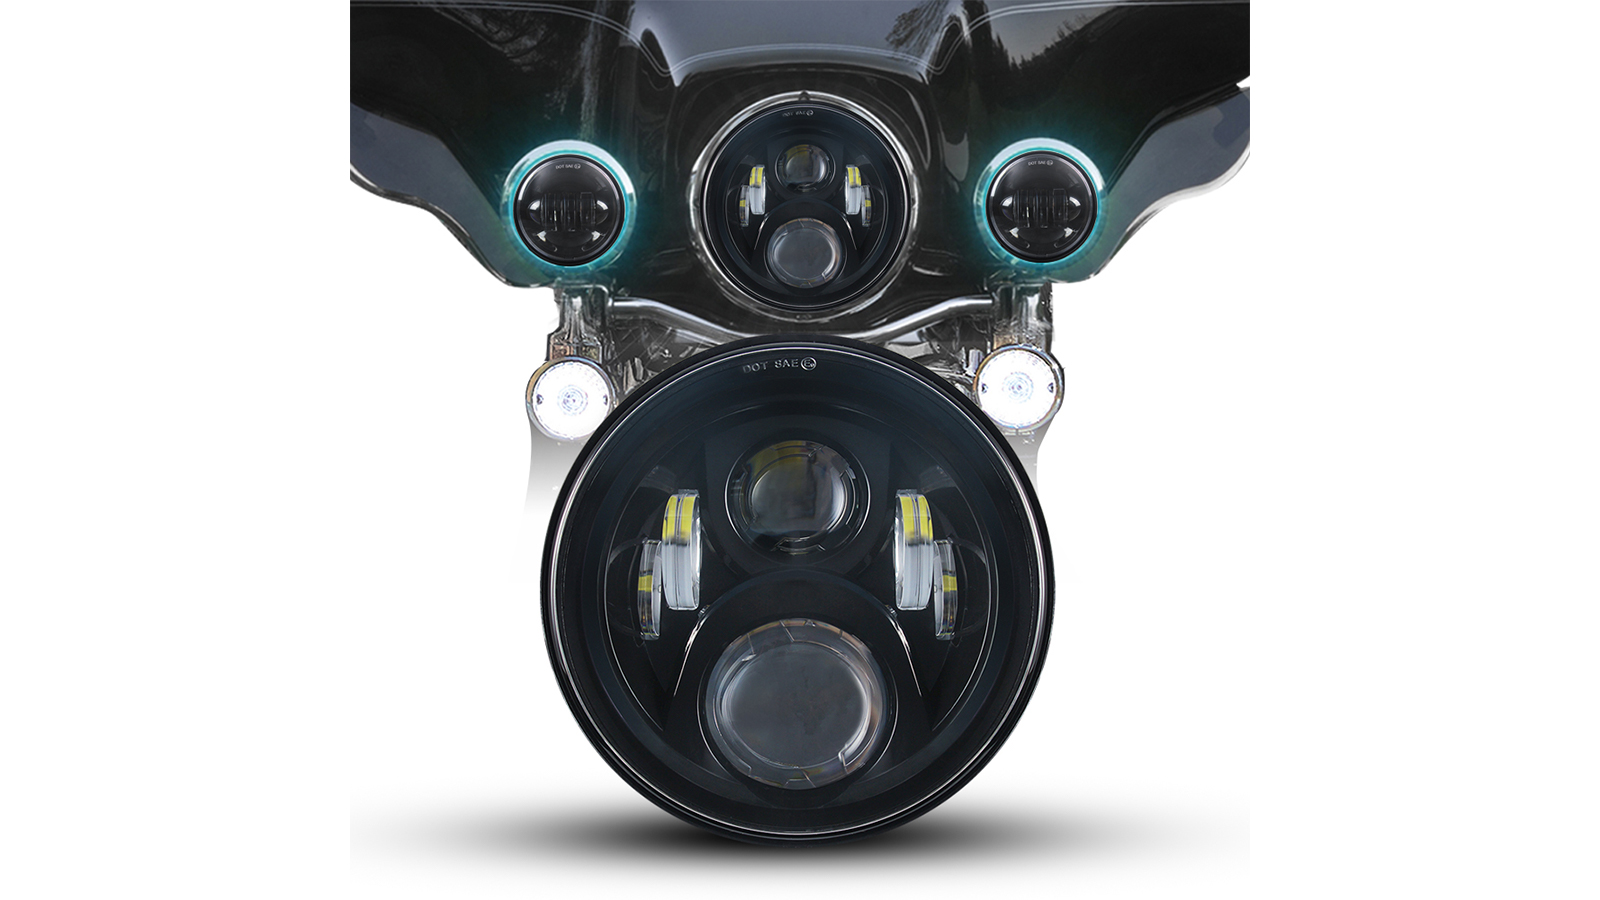 Head Light For Motorcycle Led Head Light 7 inch For Motorcyle Lighting System Motorcycle LED Headlight